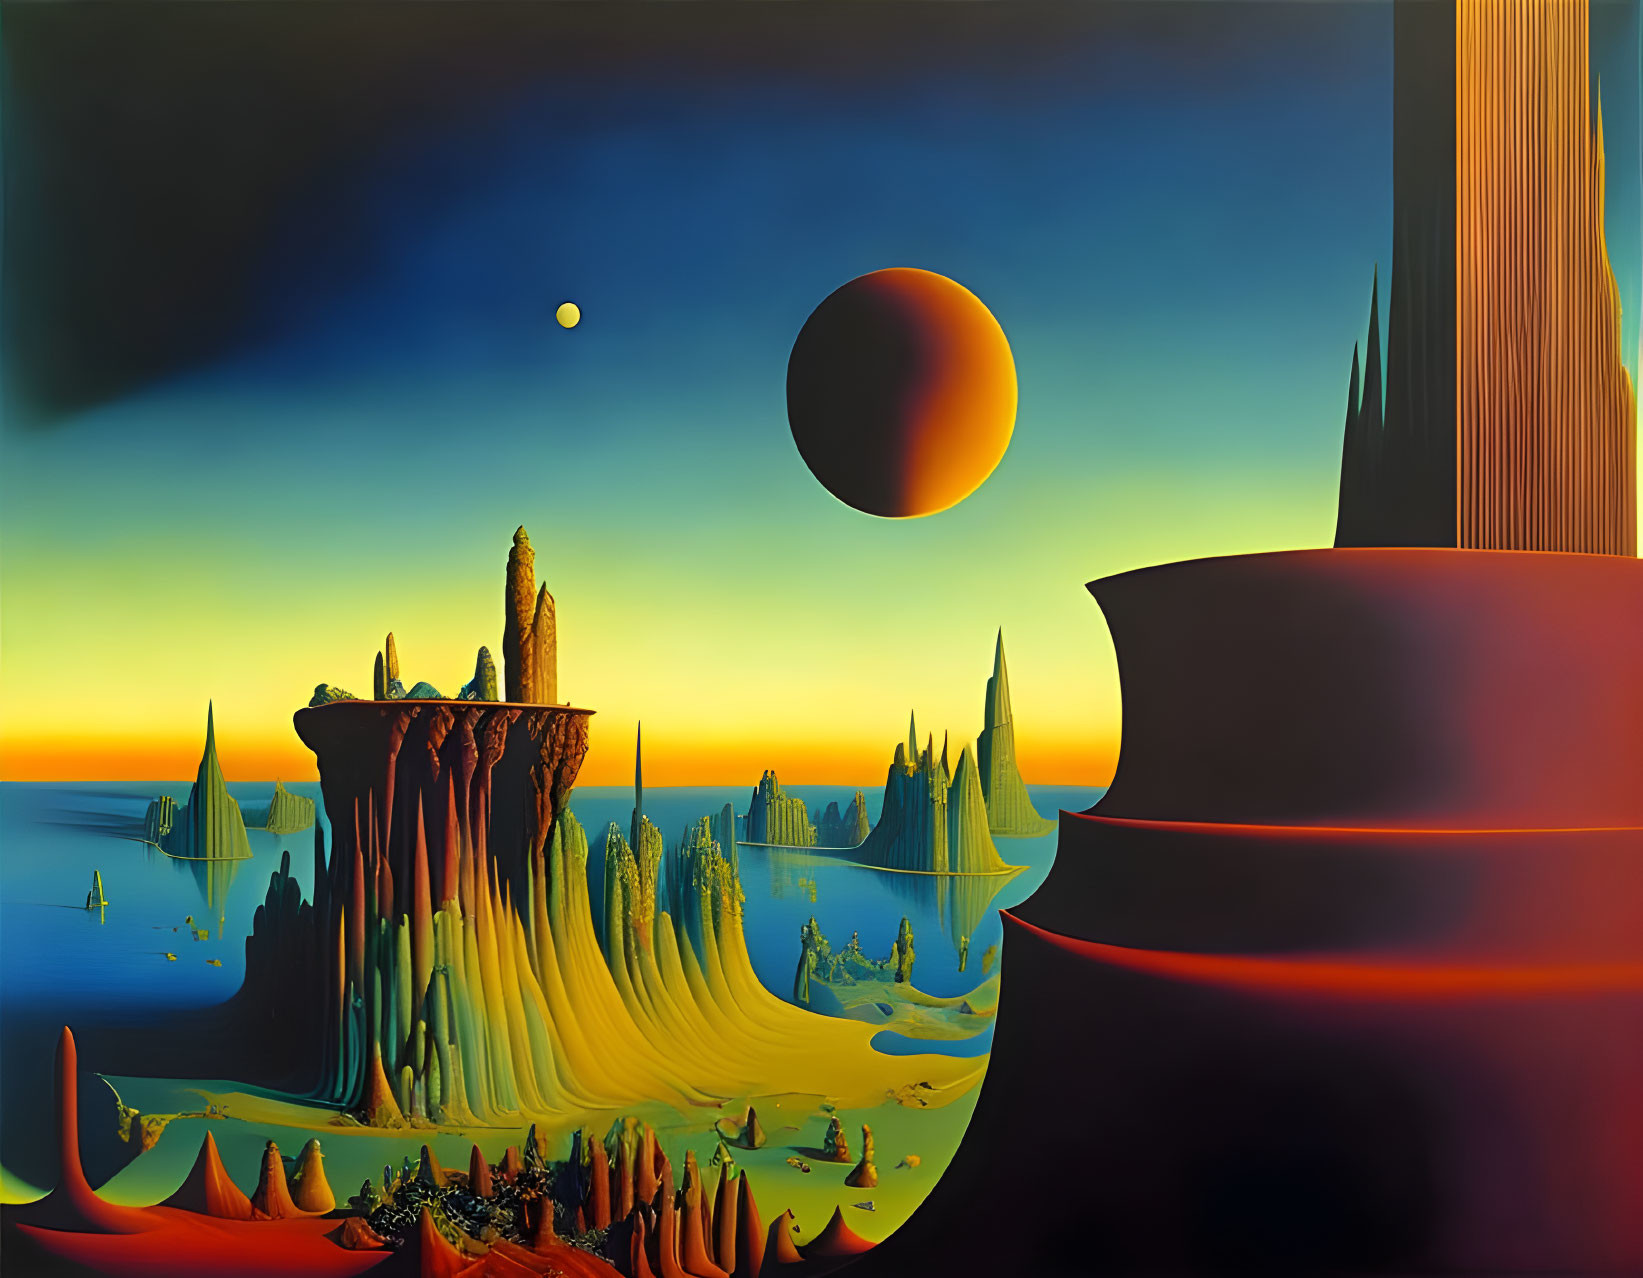 Vibrant Surrealist Landscape with Floating Orbs and Dripping Structures